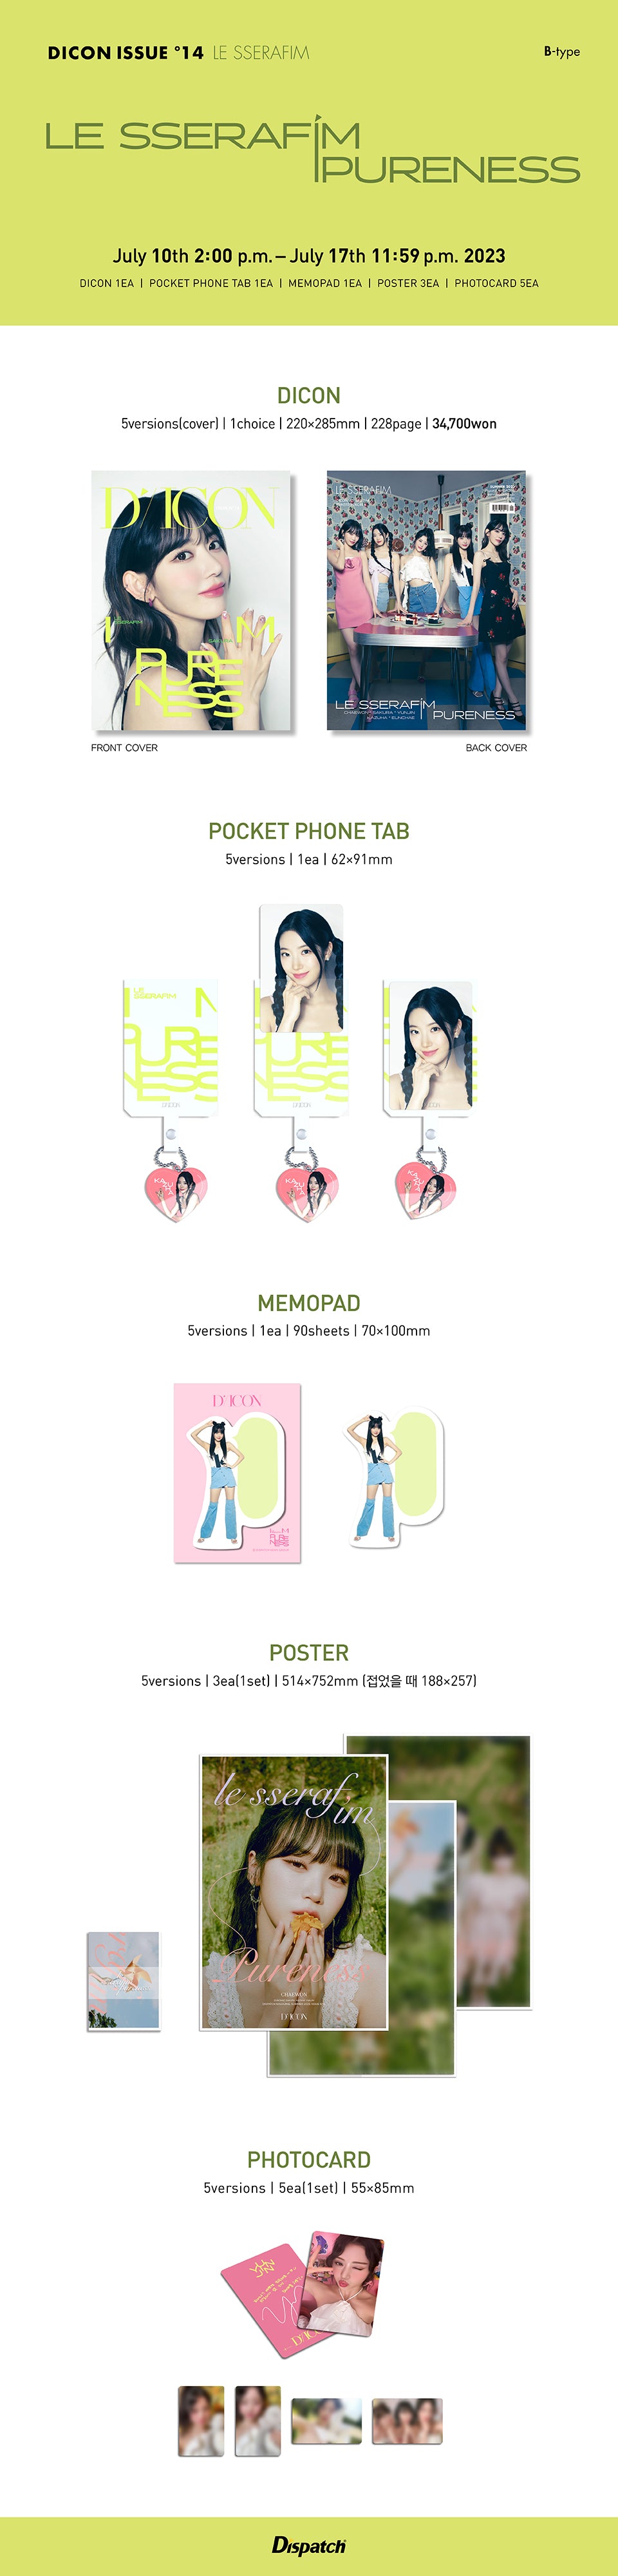 1 Photo Book (228 pages)
1 Pocket Phone Tab
1 Memo Pad (90 sheets)
3 Folded Posters
5 Photo Cards